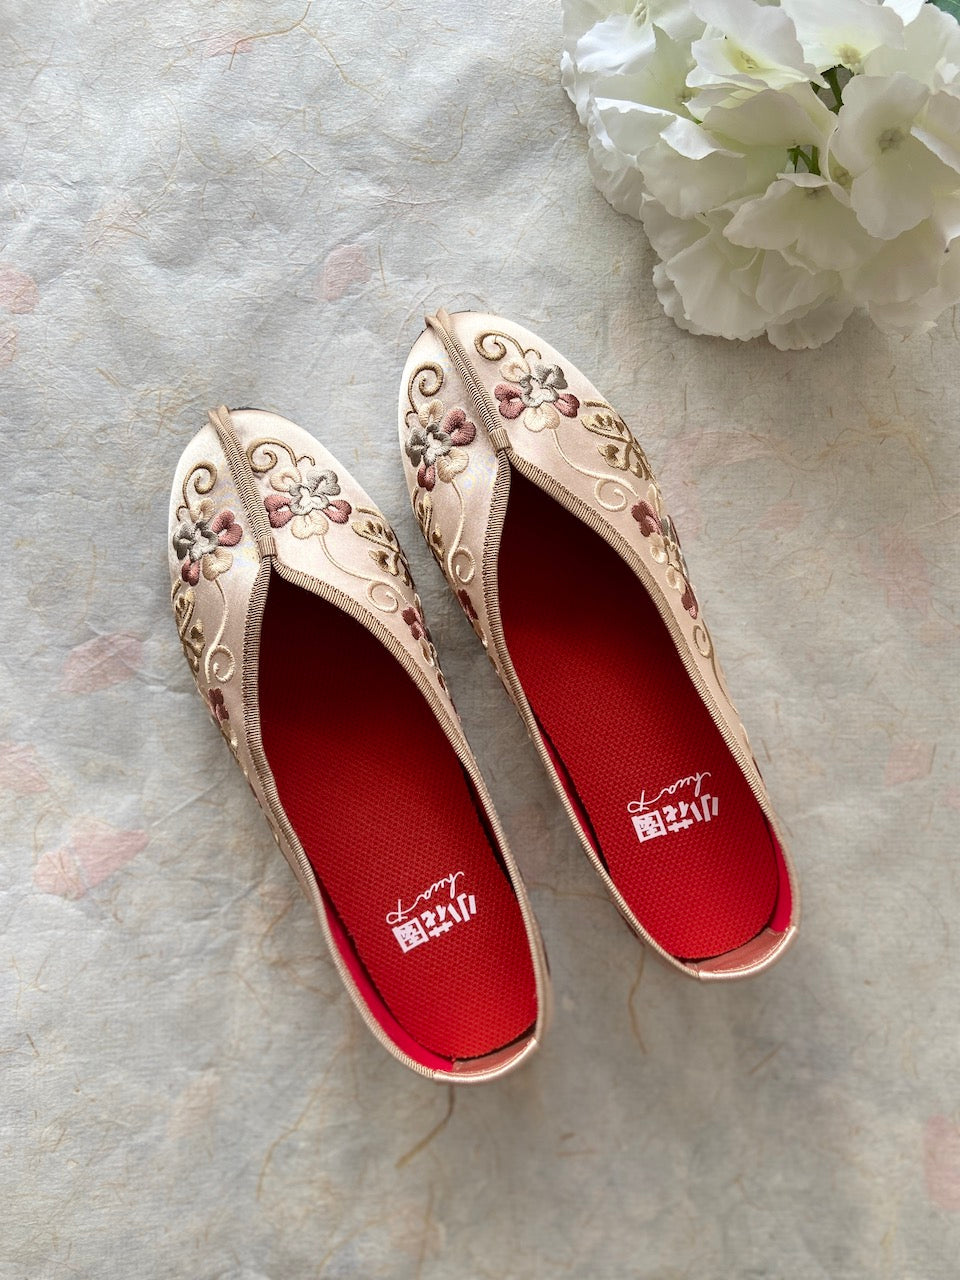 Floral Embroidered Shoes - Gold